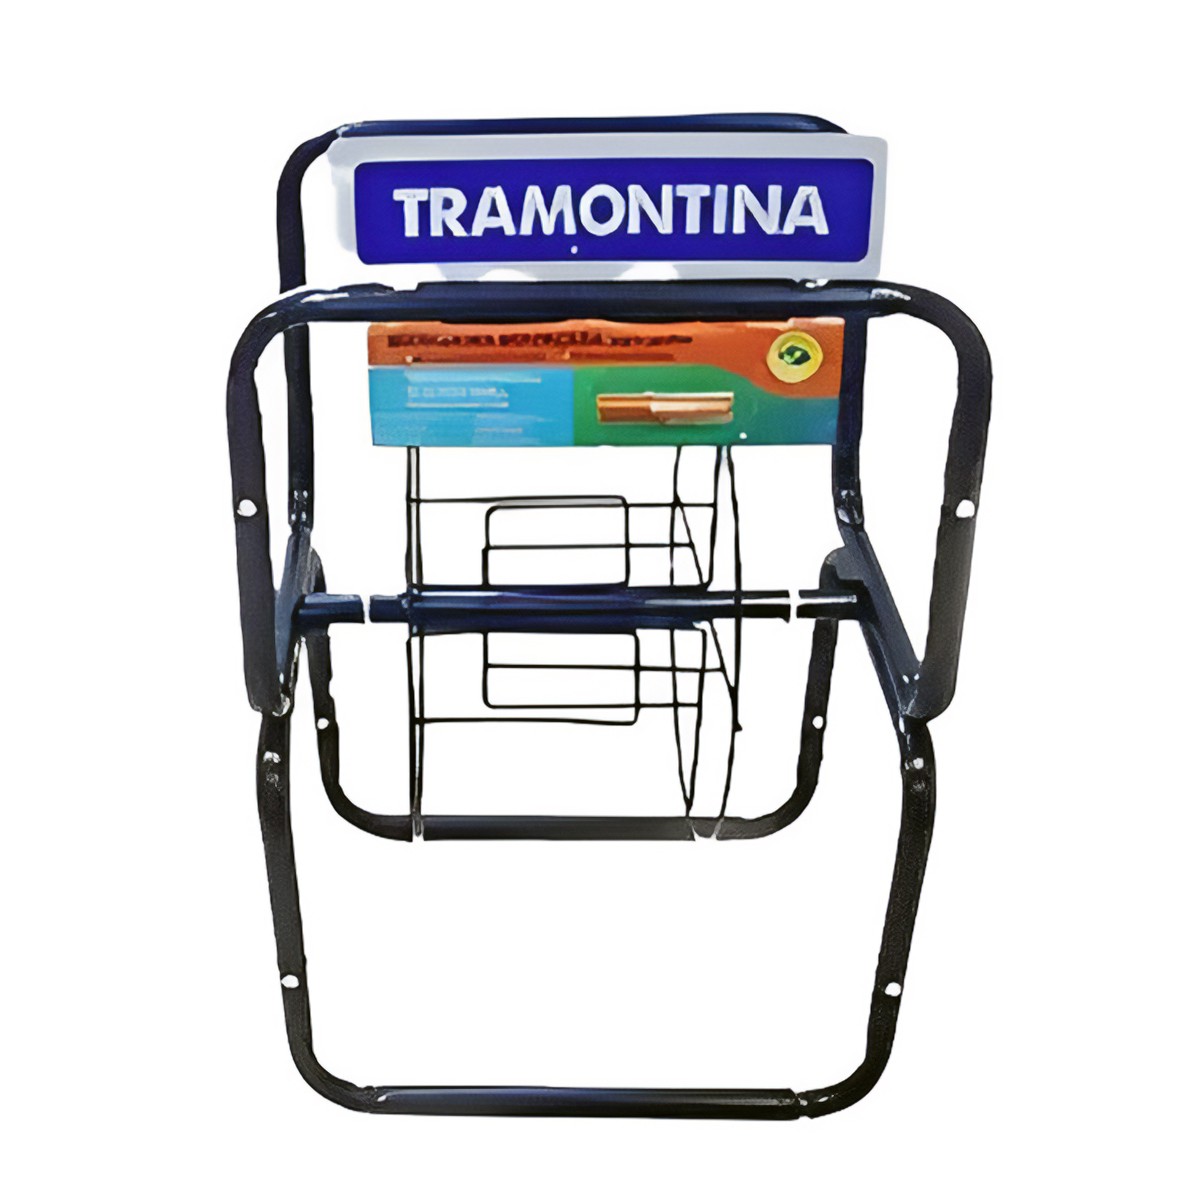 STAND FOR PRESSURE HOSE TRAMONTINA